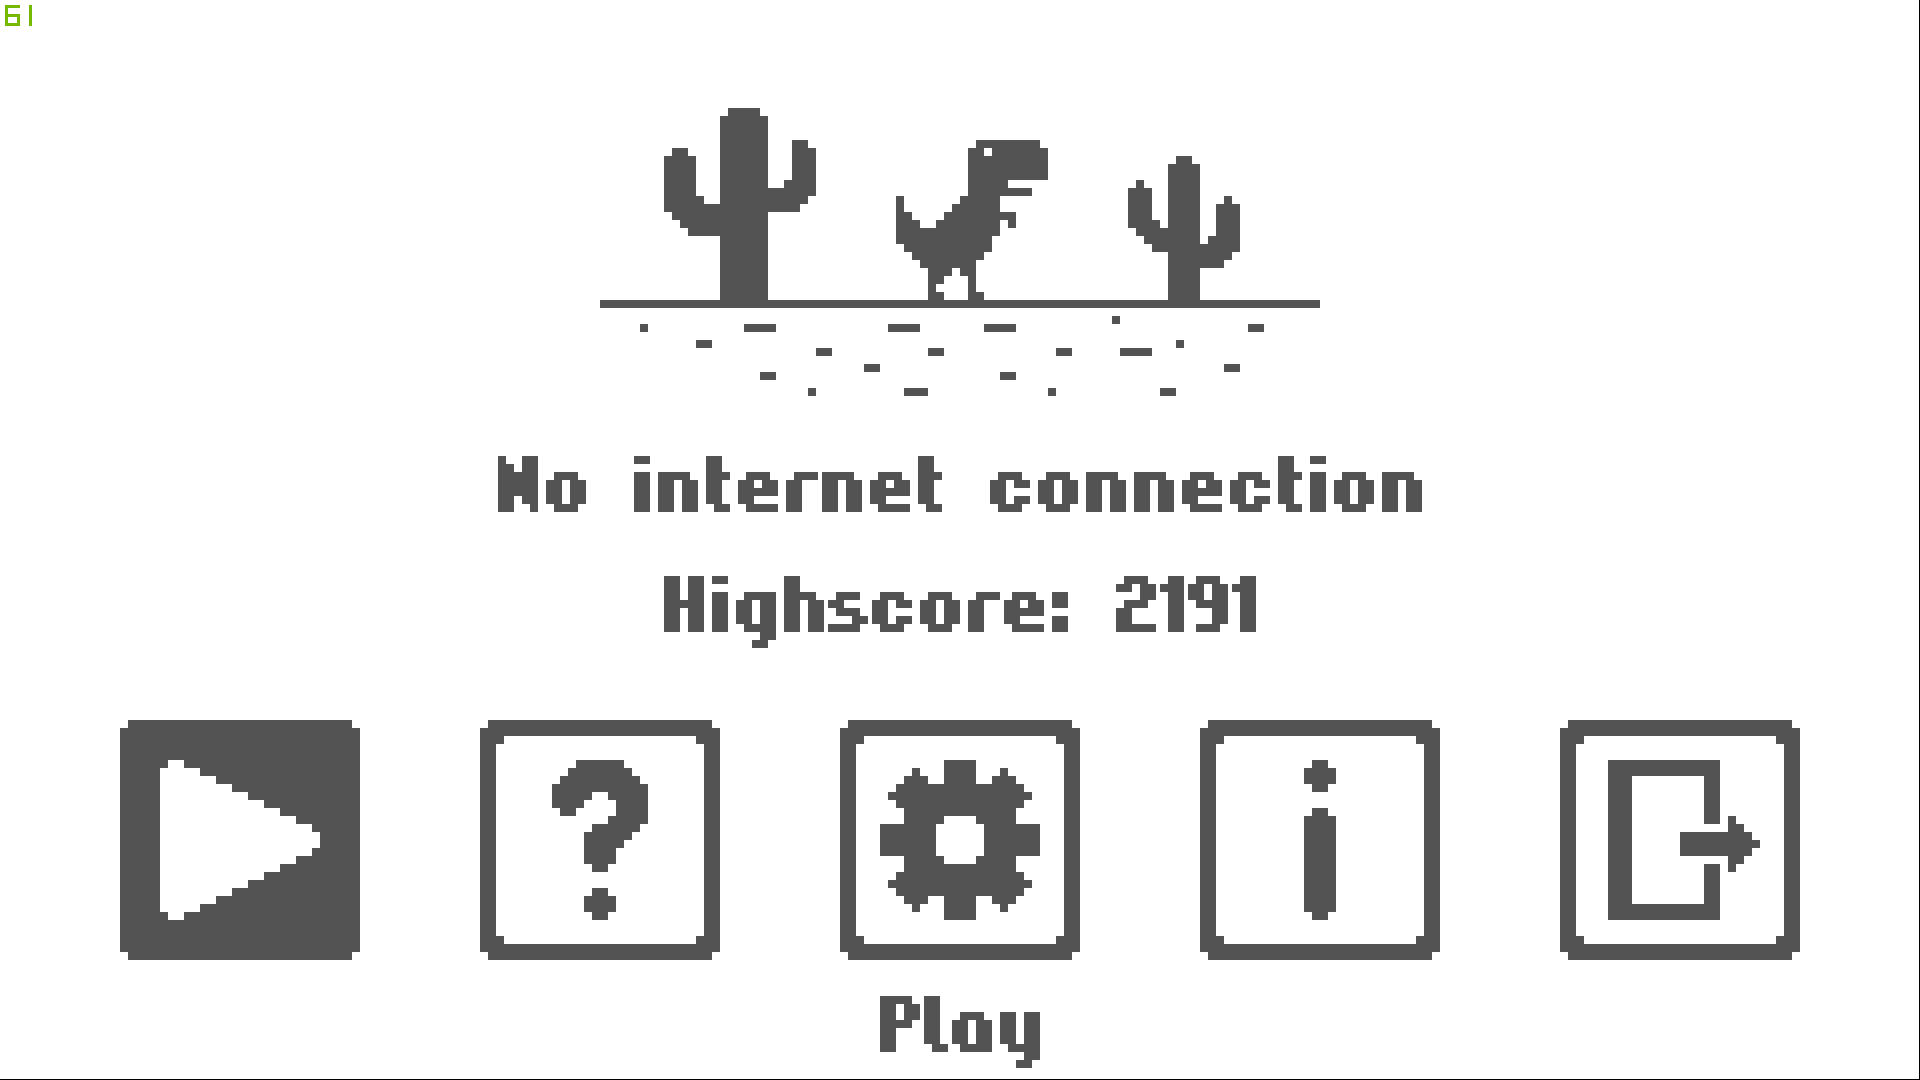 Game is connected. No Internet connection. No Internet game. No Internet connection image. Bad Internet connection.